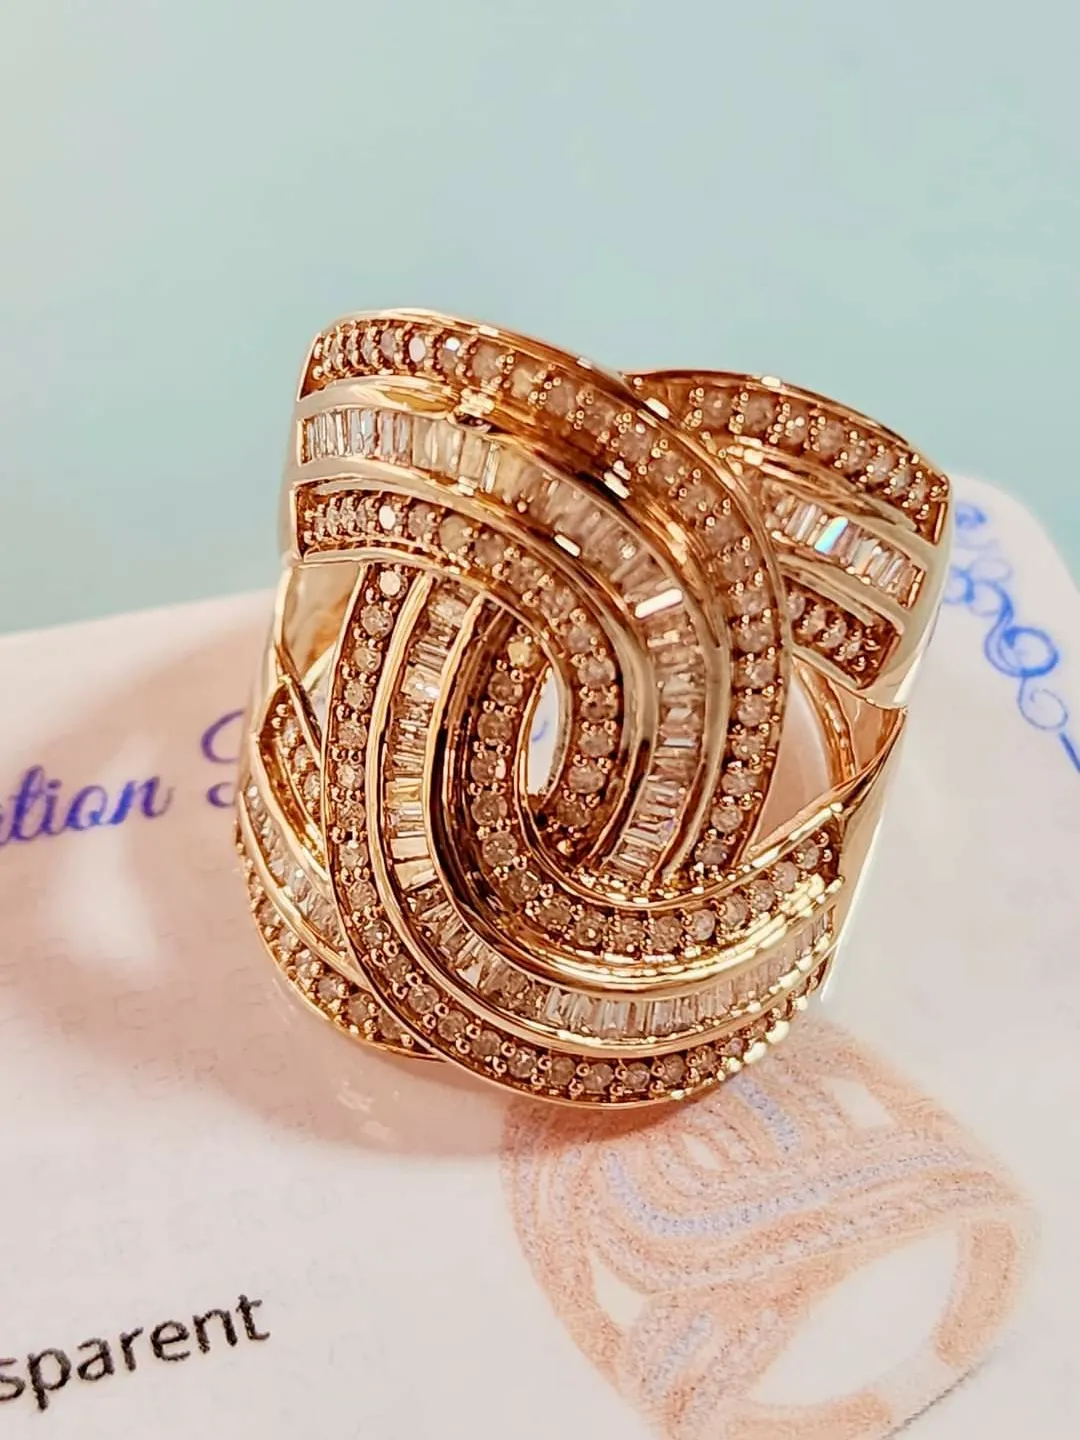 chanel inspired ring 💍so beautiful 😍, Gallery posted by alex04270621